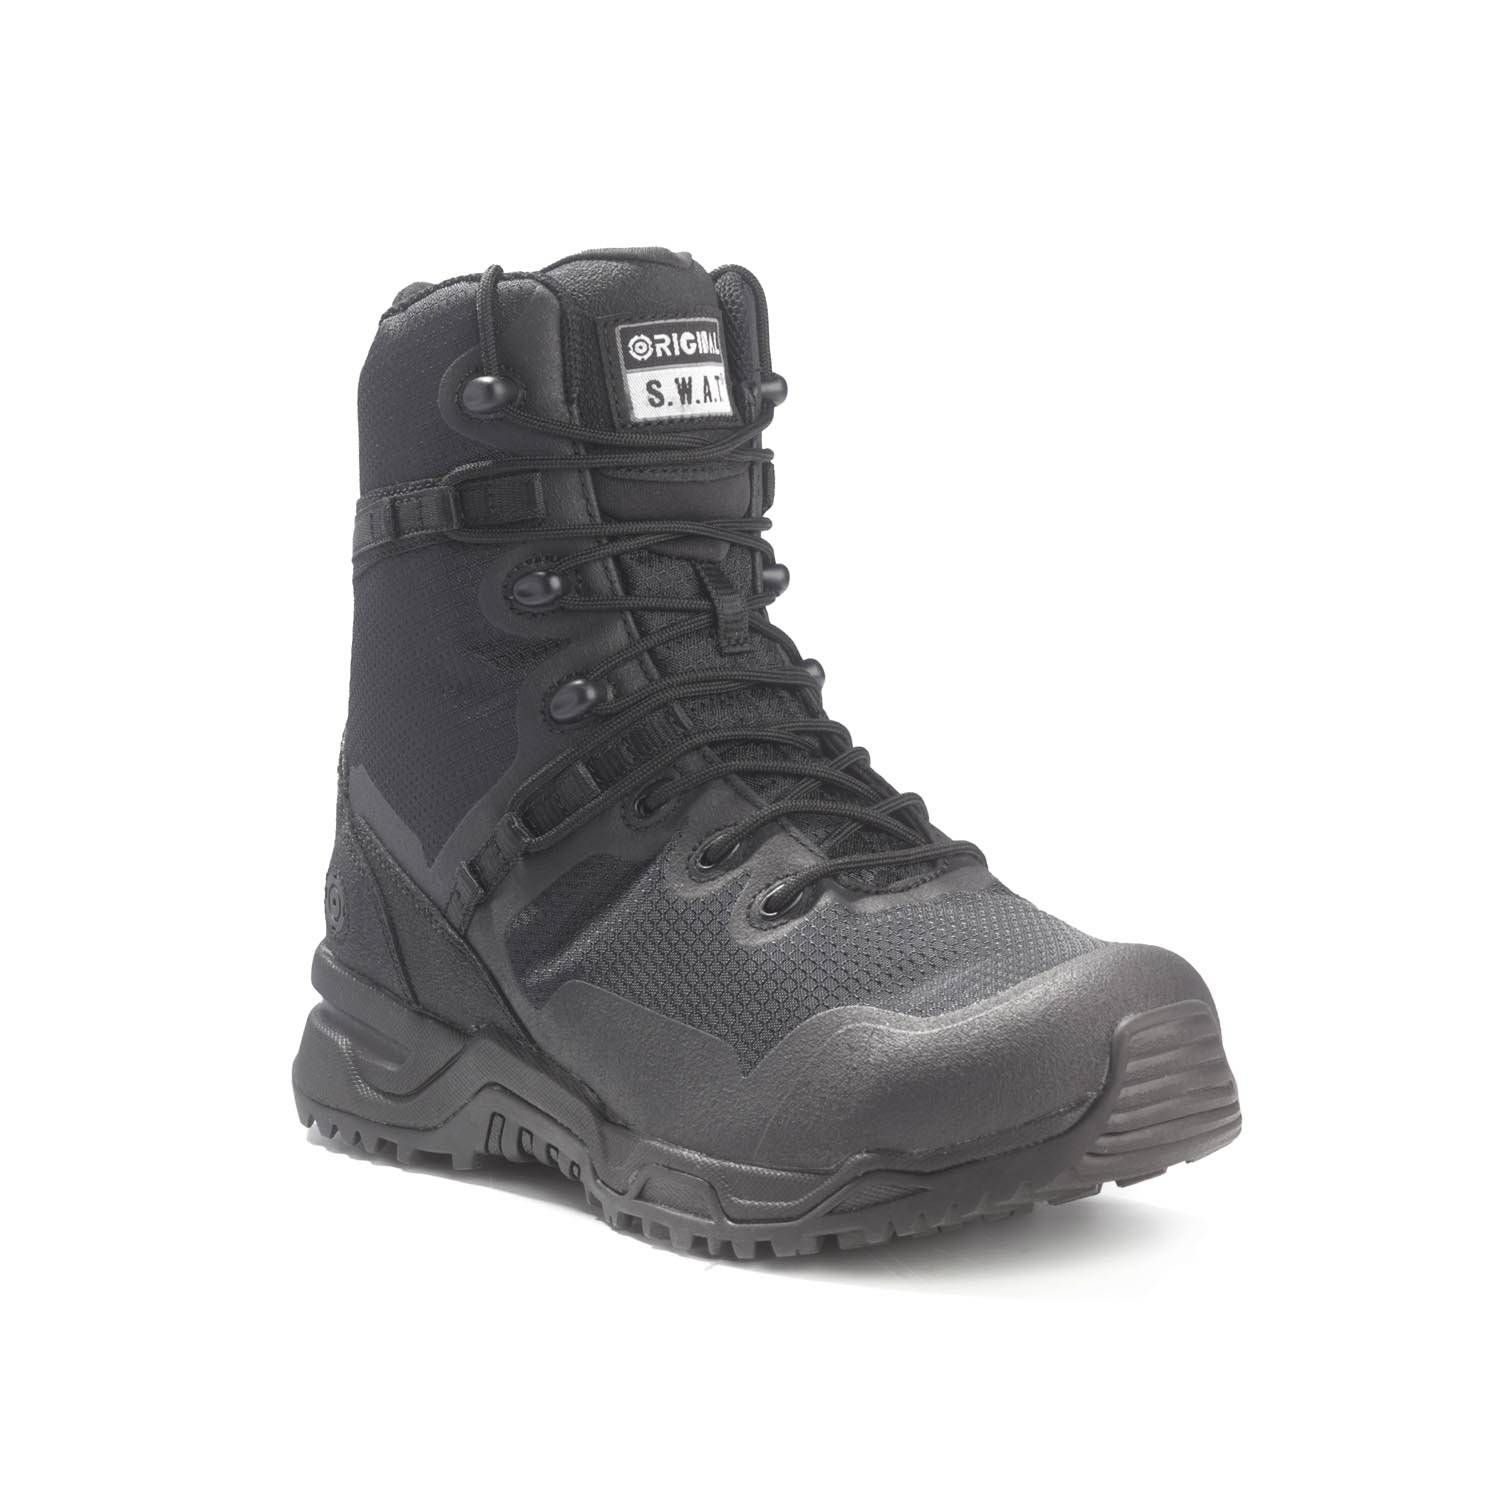 Original S.W.A.T Alpha Fury 8" Side Zip Safety Toe Boots